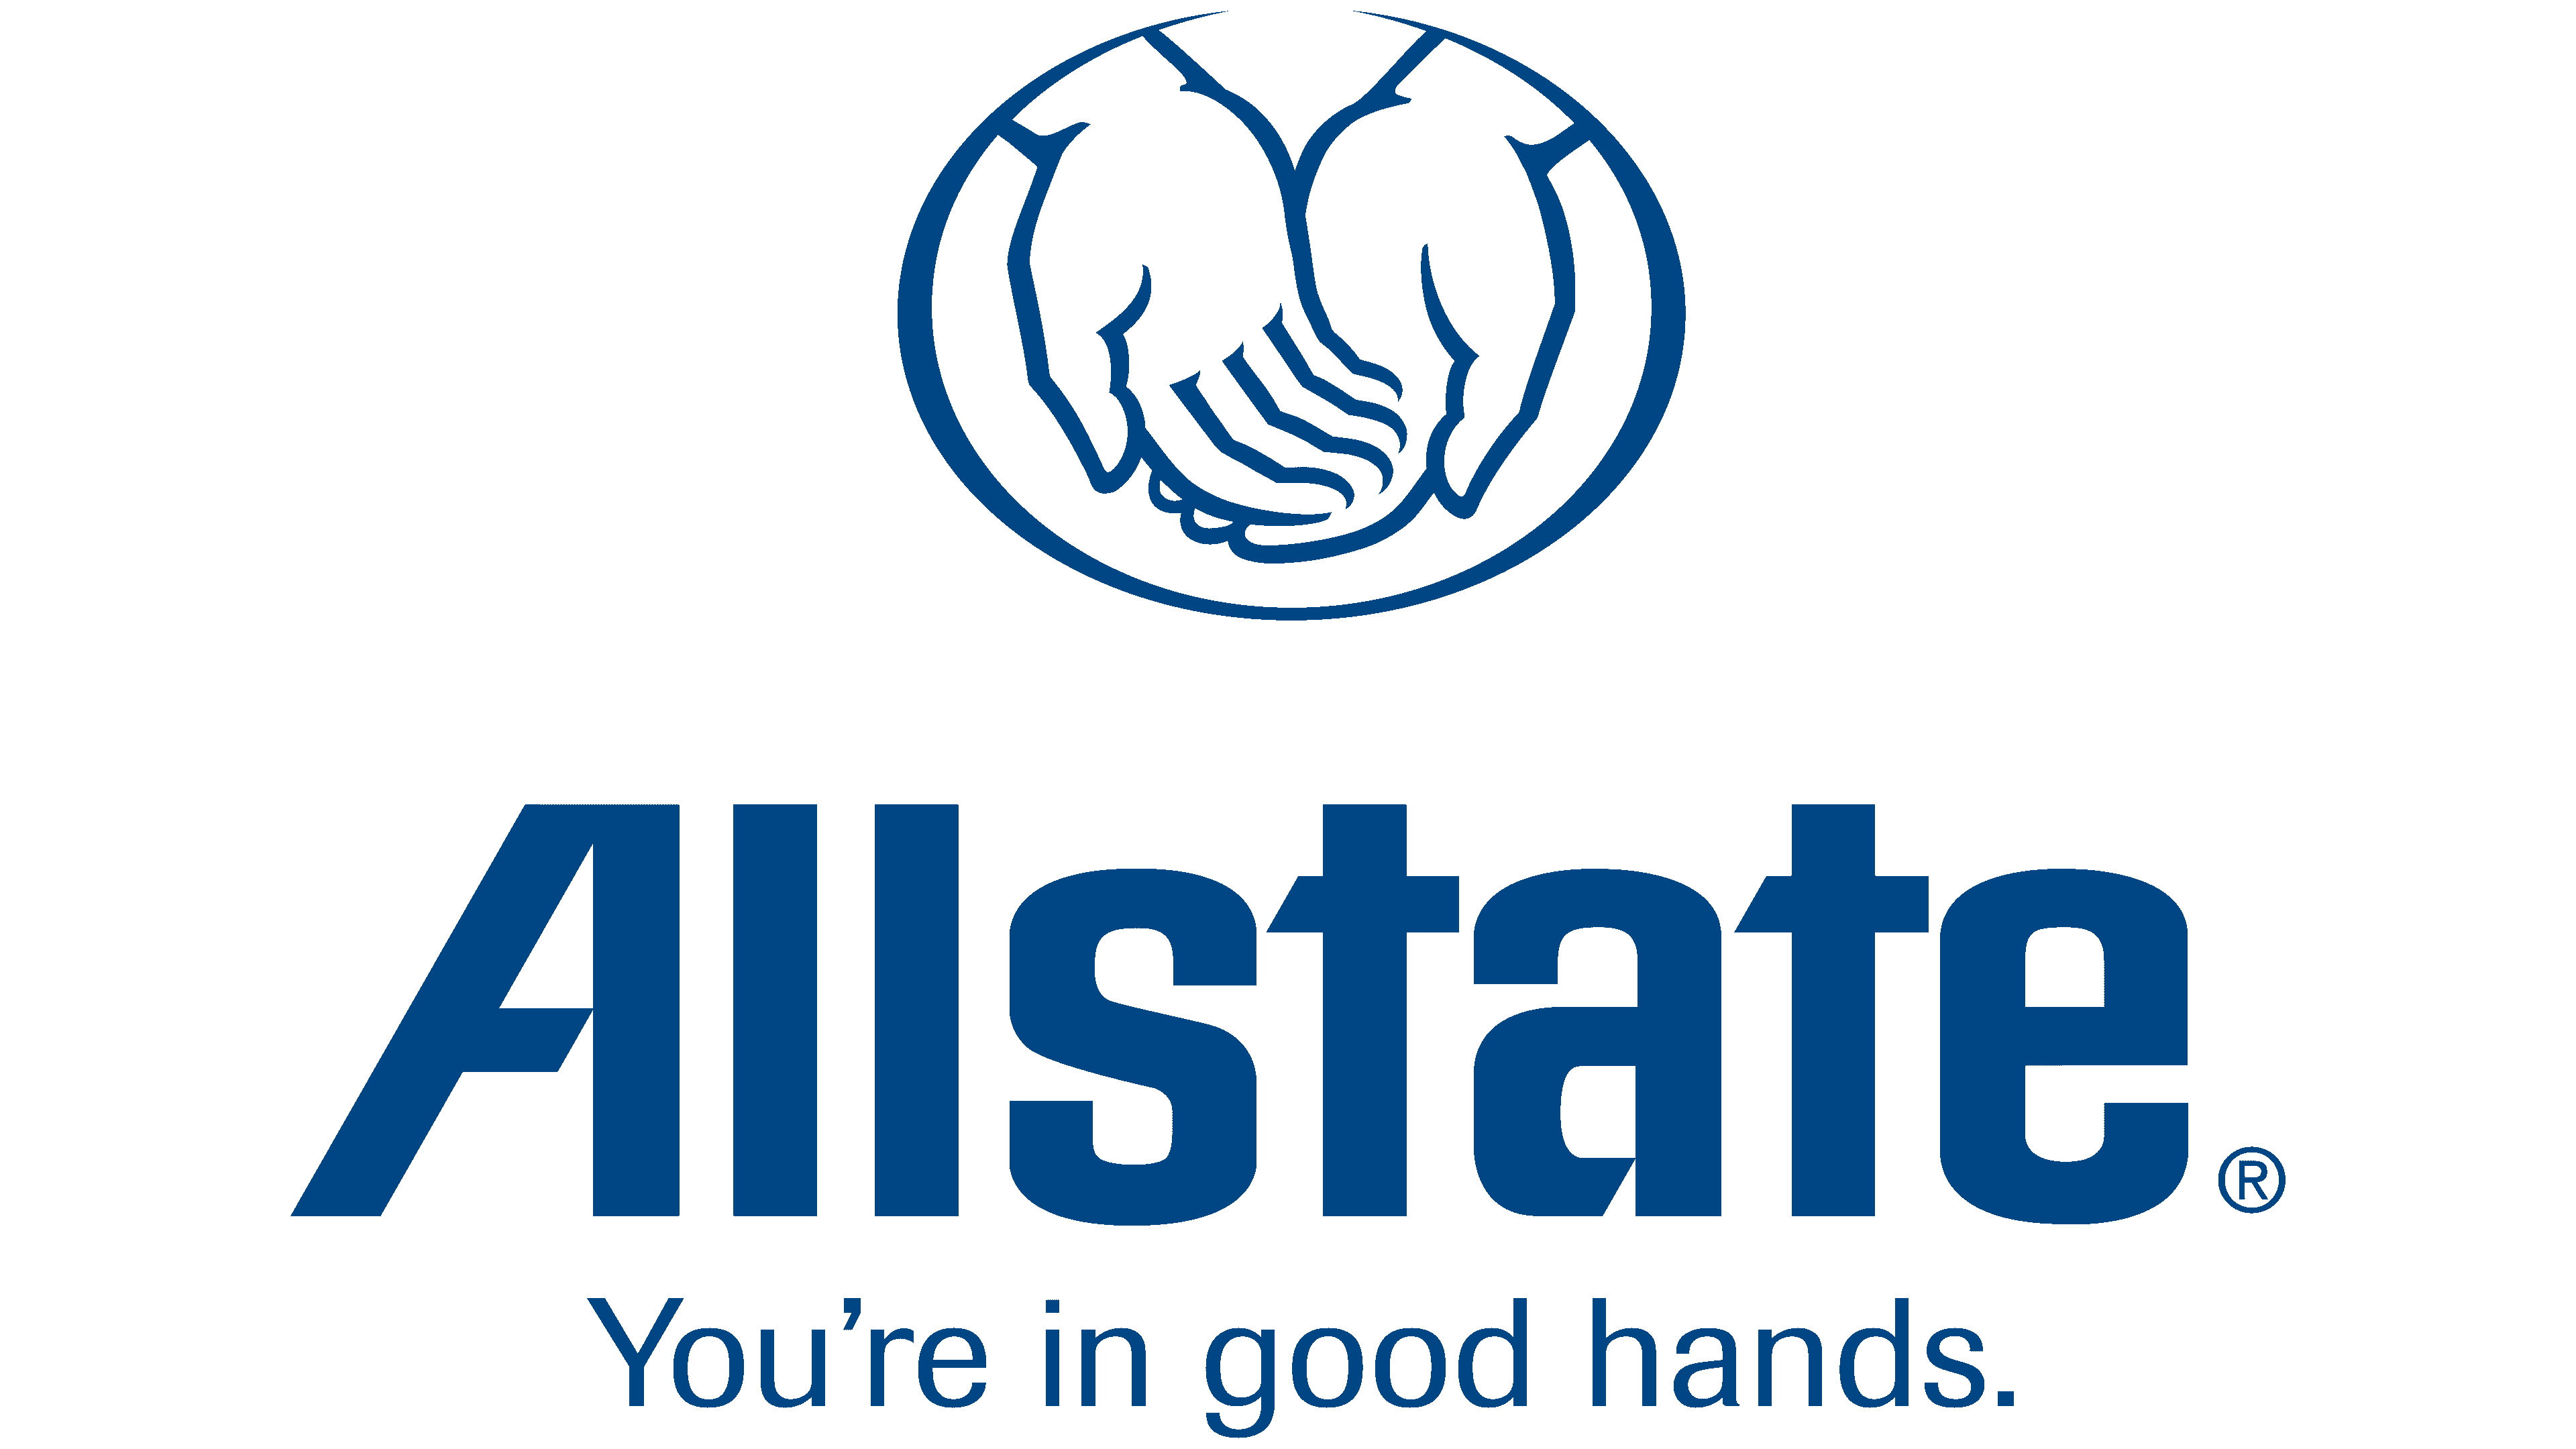 M&m Insurance: Allstate Agency - Life Insurance Quotes